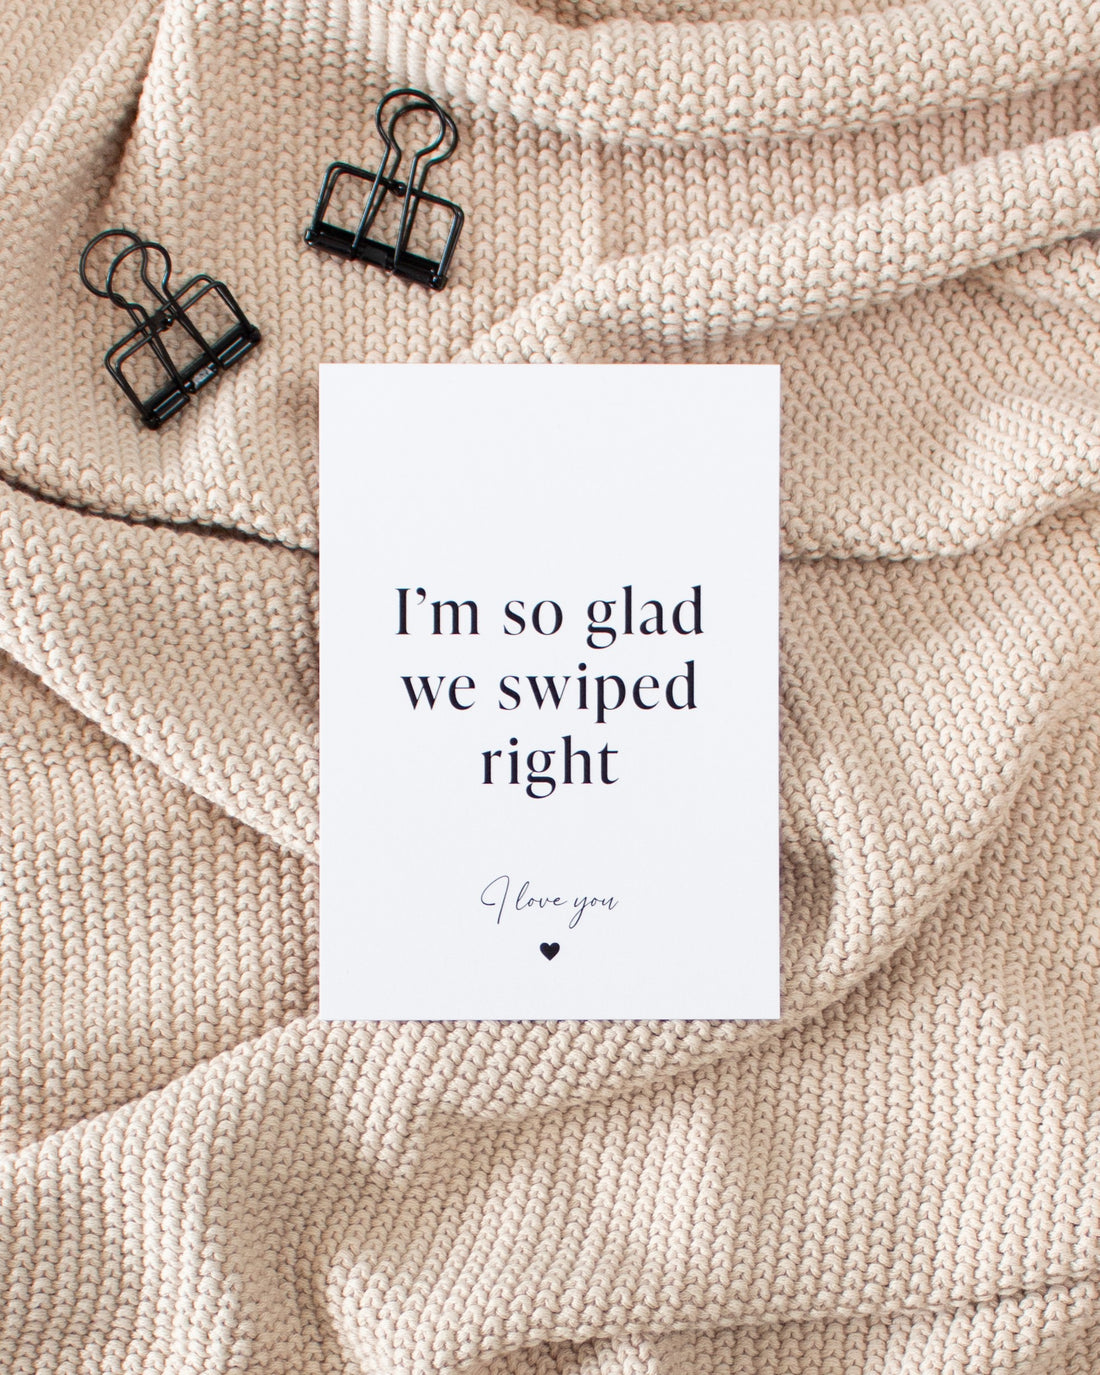 A white postcard laying on a beige knitted blanket with some black binder clips. The postcard design reads &quot;I&